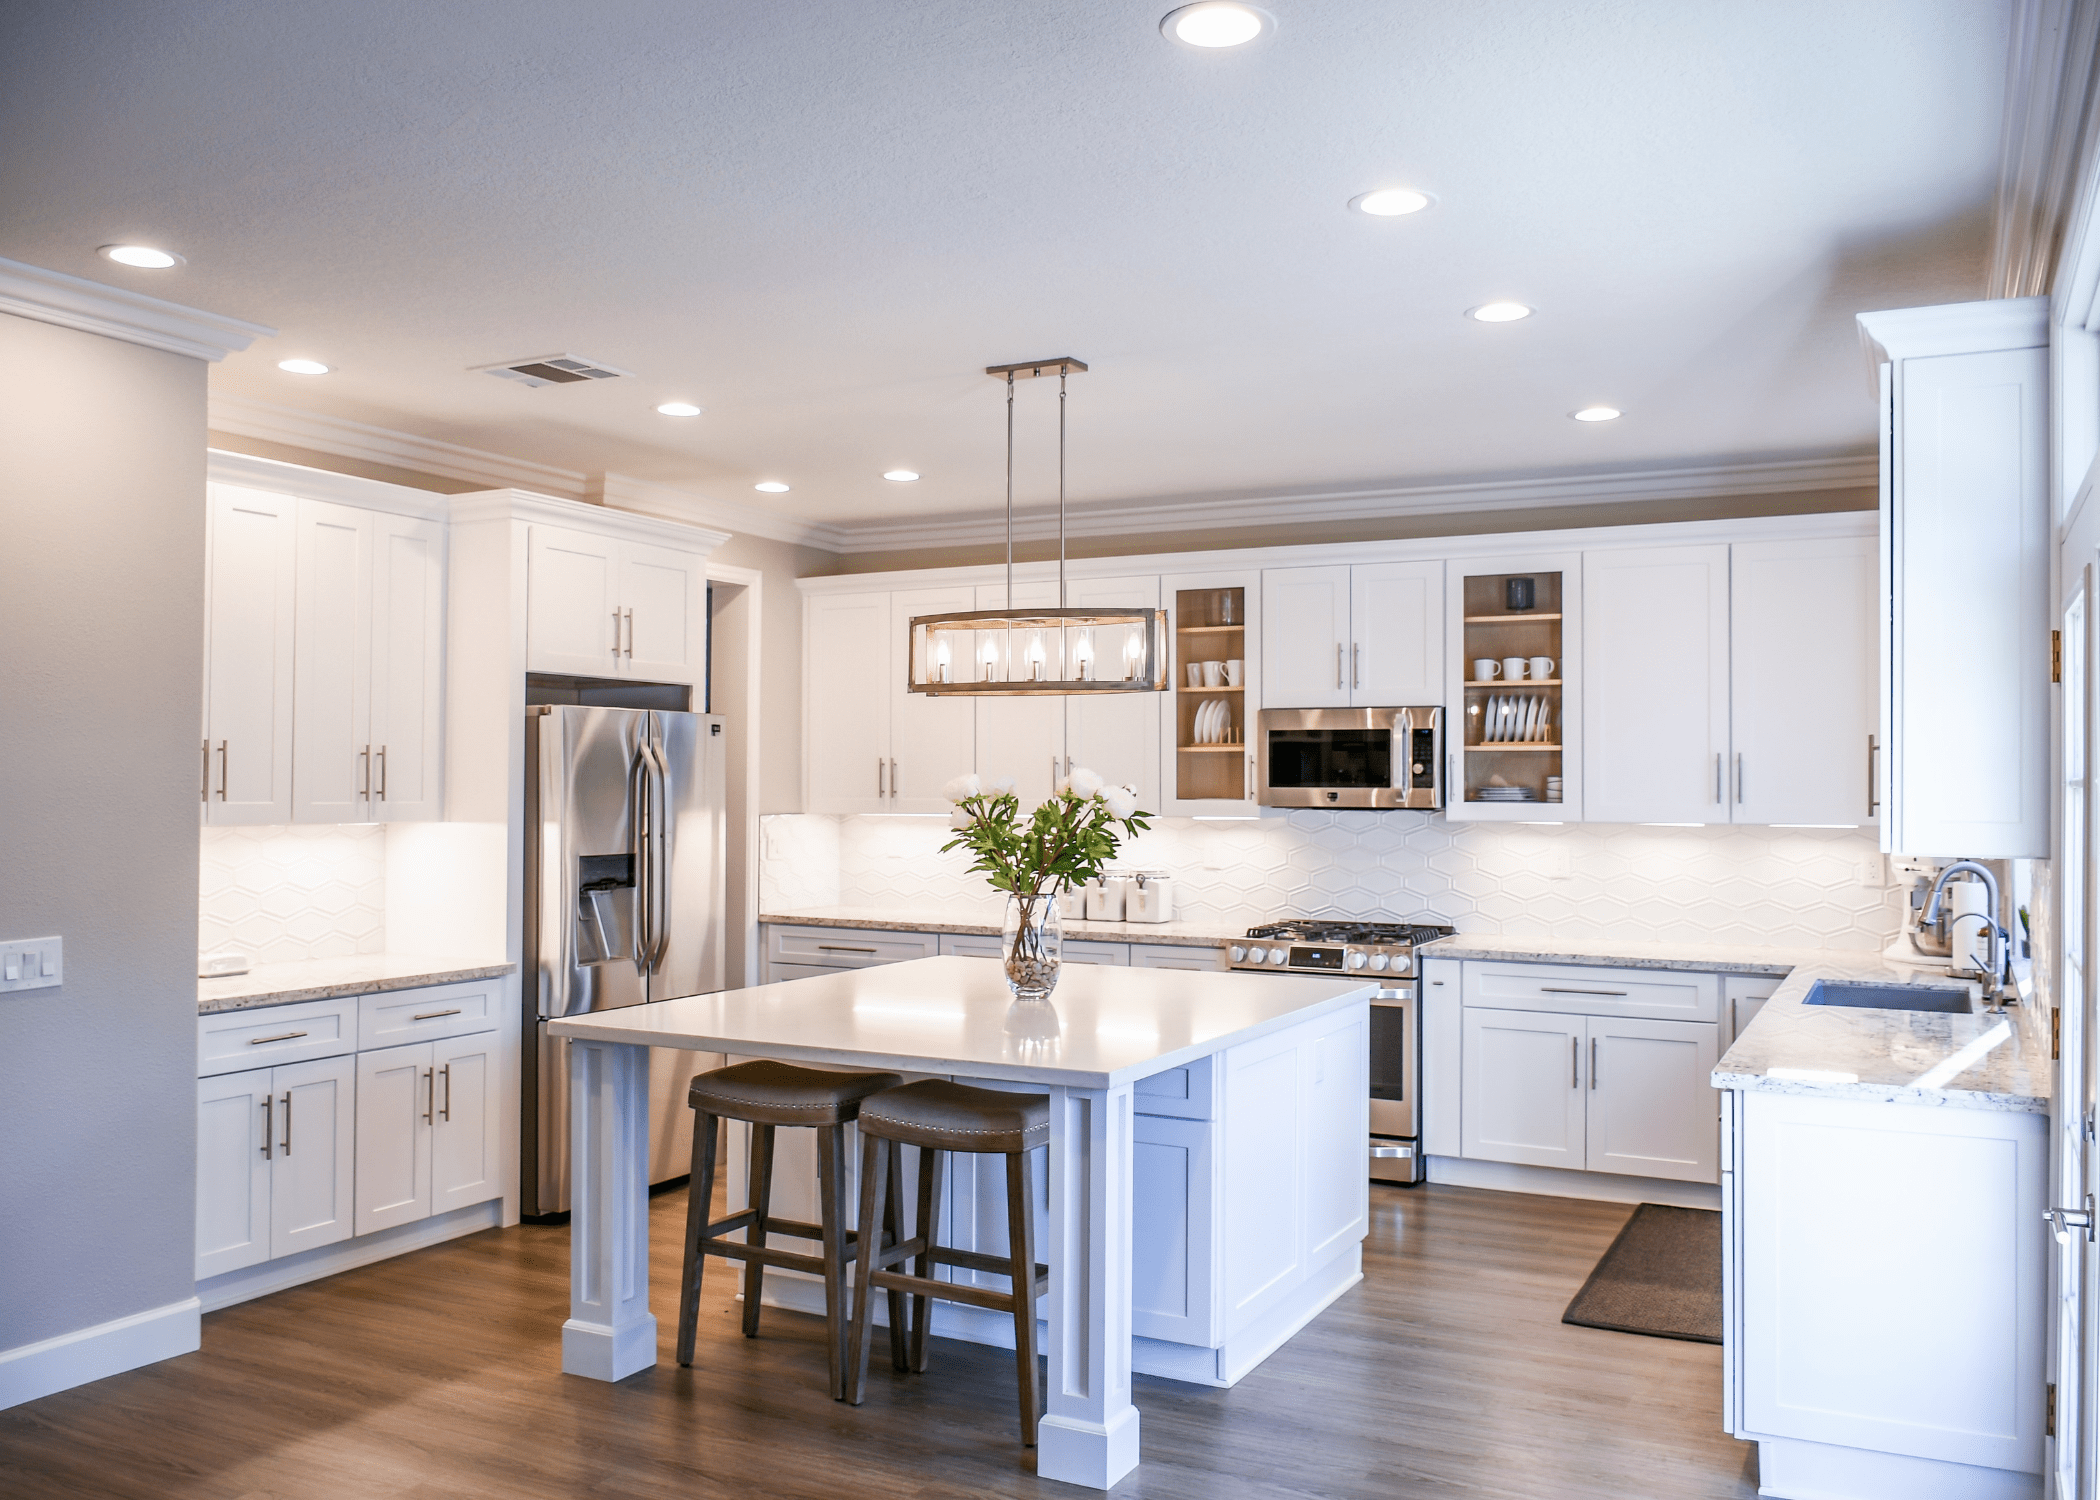 white kitchen cabinets, with center island and stainless steel appliances